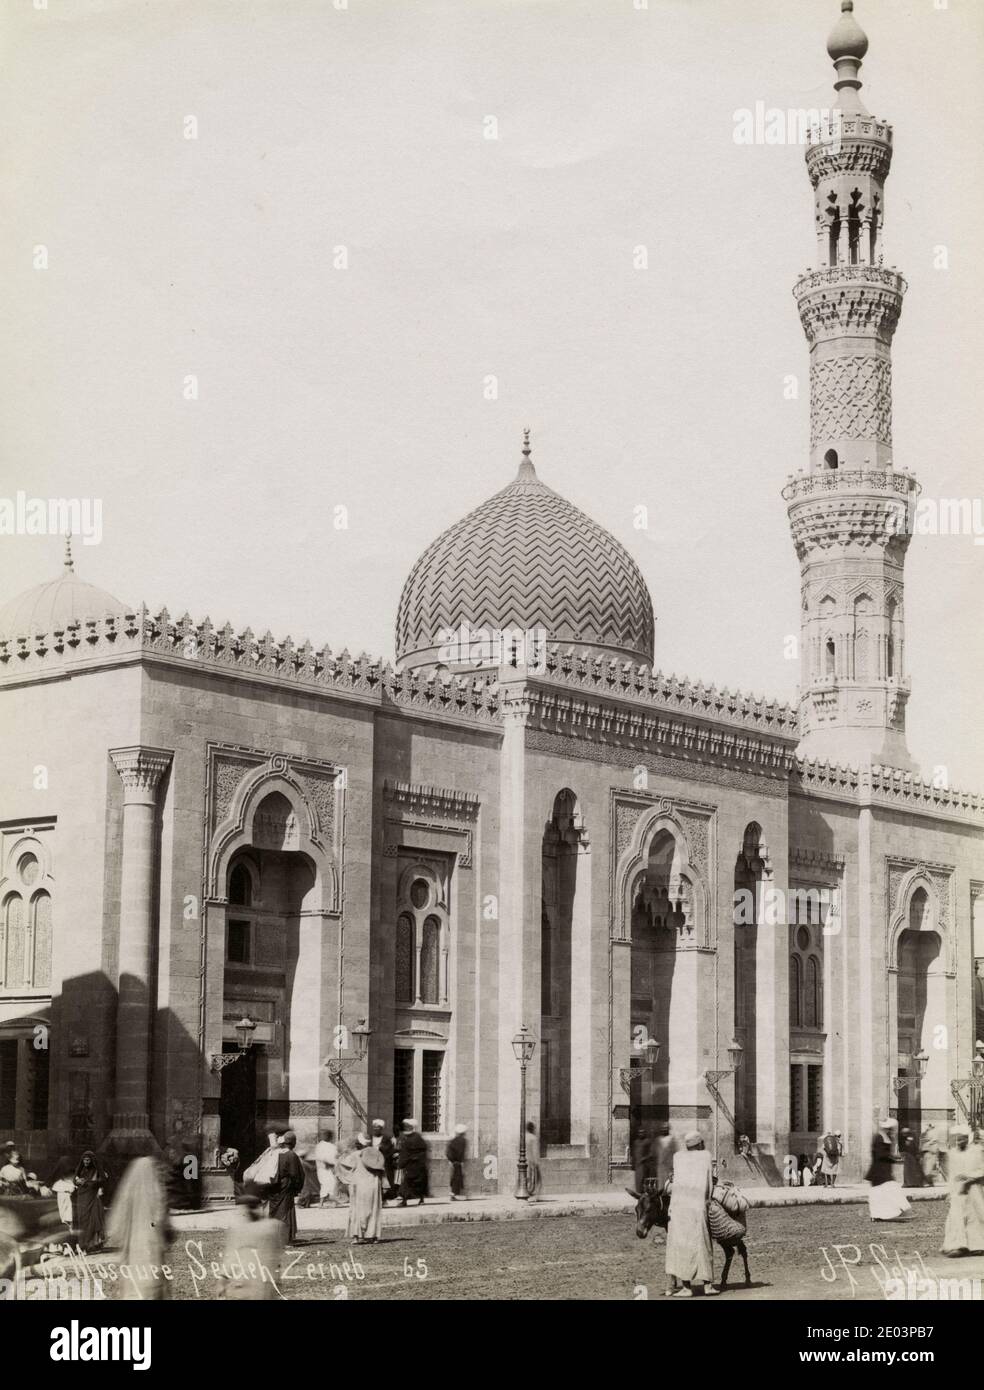 19th century vintage photograph - Al-Sayeda Zainab Mosque,  a historic mosque in Cairo, Egypt,  one of the most important and biggest mosques in the history of Egypt. Stock Photo